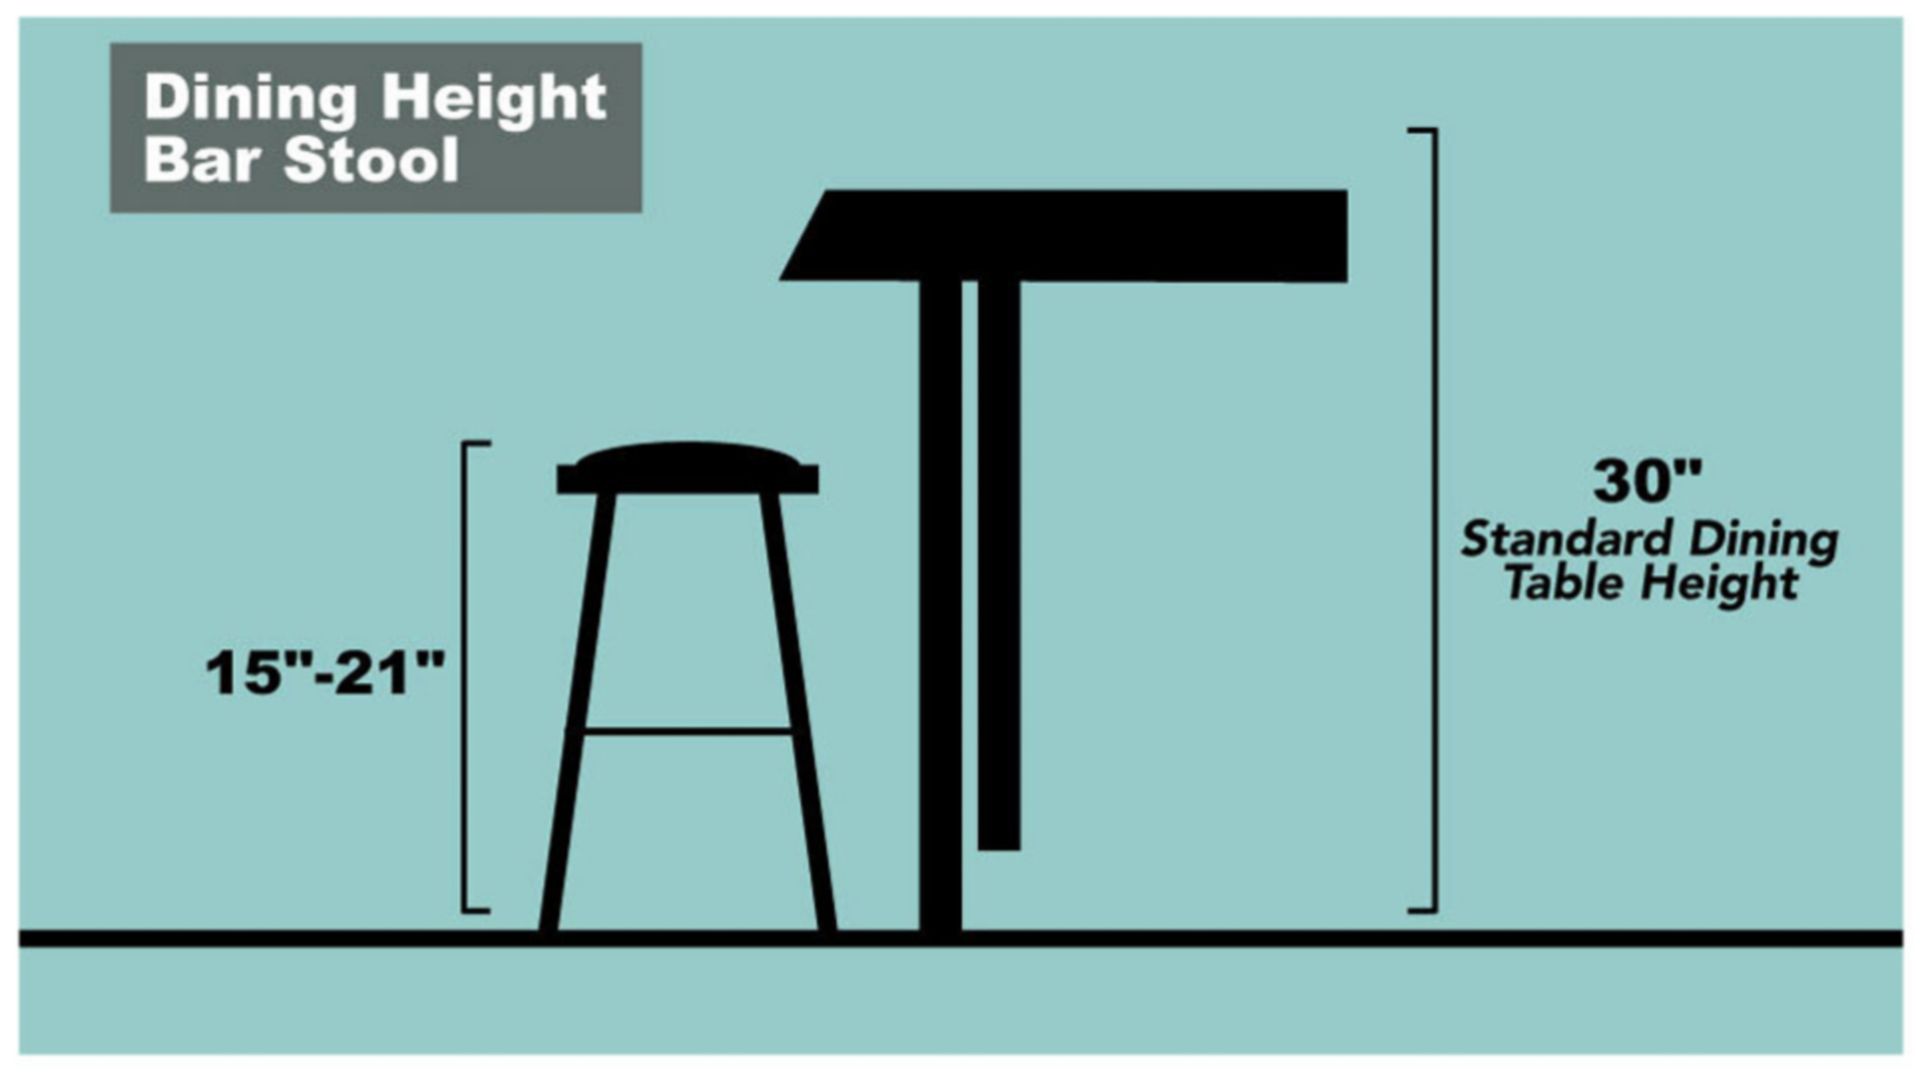 Dining Height Bar Stool. 15-21inches. Fits under a standard dining table measuring 30 inches.